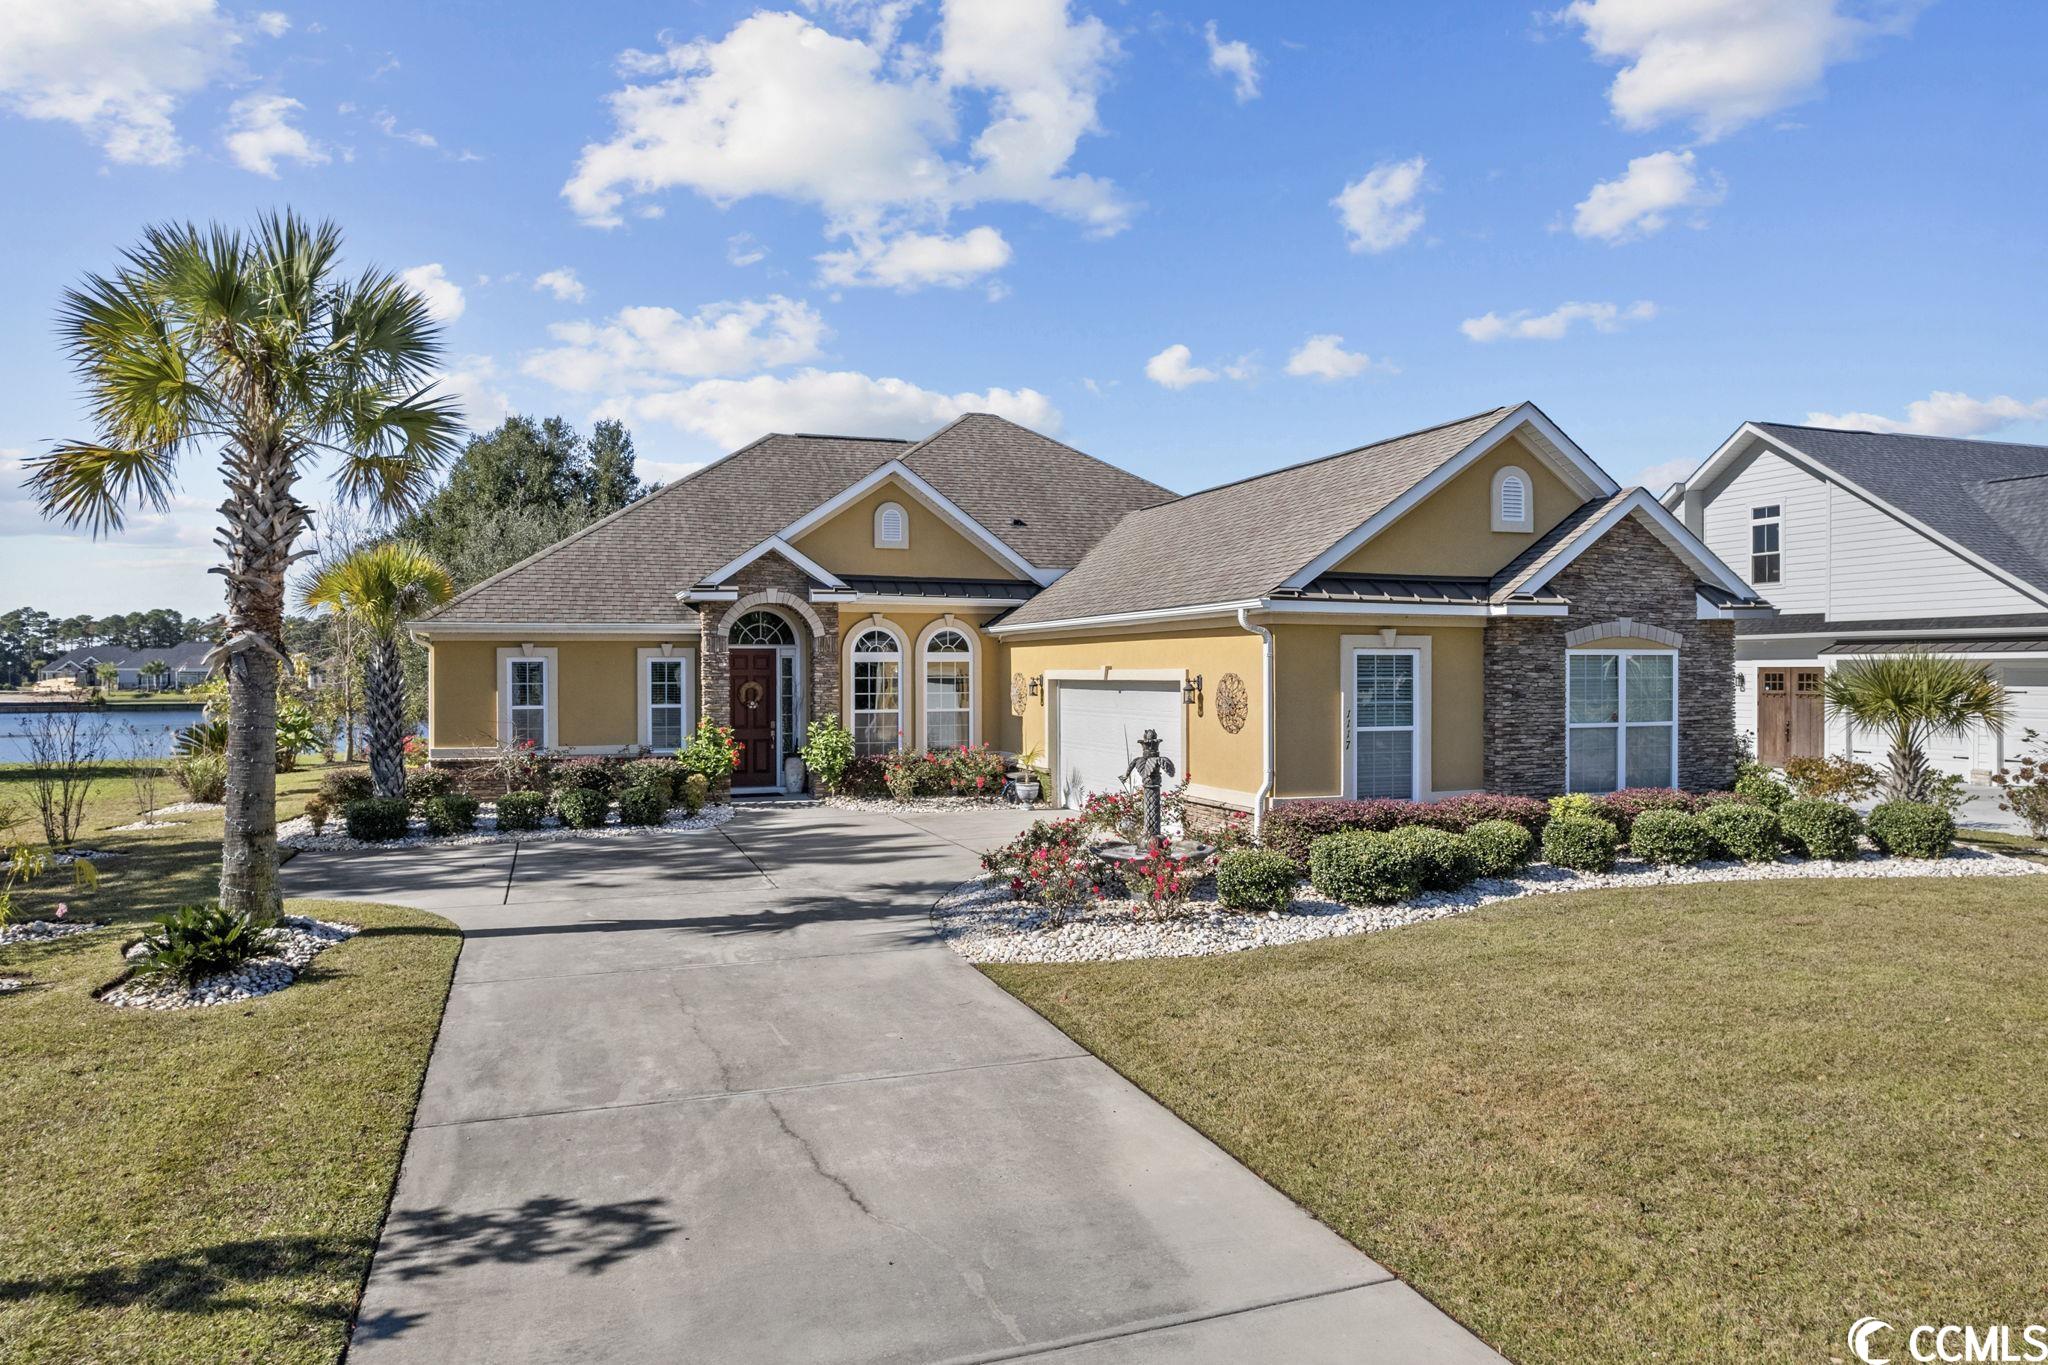 1117 Glossy Ibis Dr., Conway, SC 29526